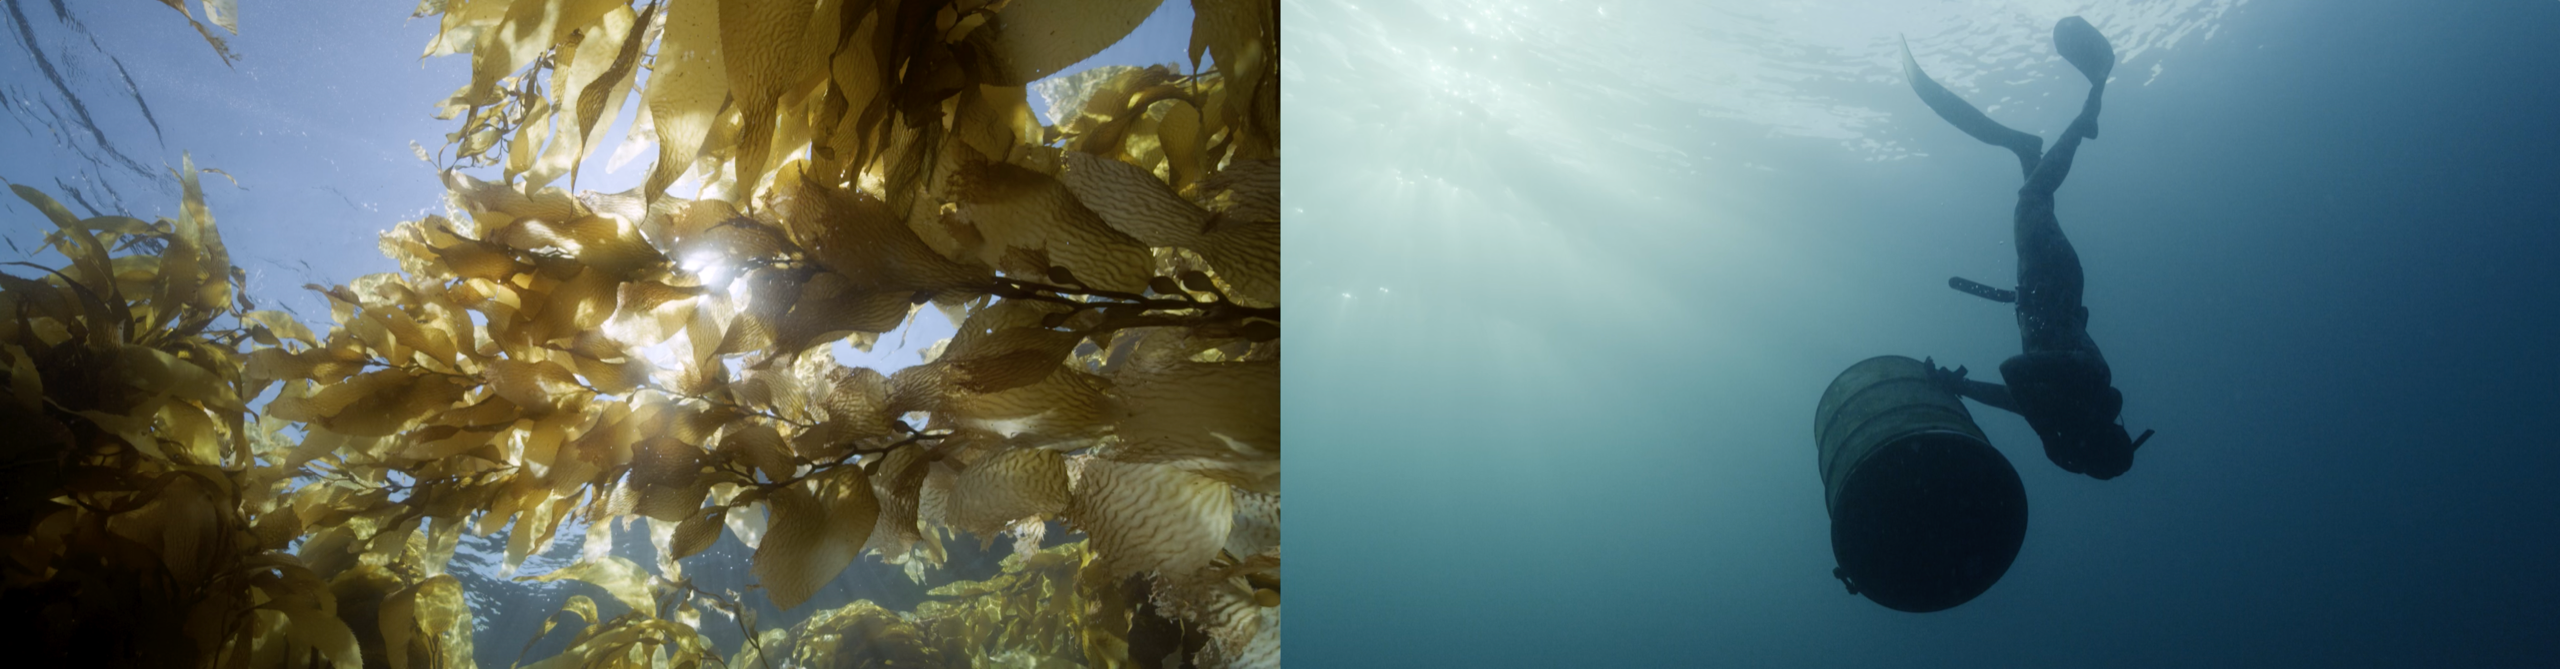 there are two frames, on the left looking from underwater up at kelp with the sun in the sky, on the right a diver and barrel